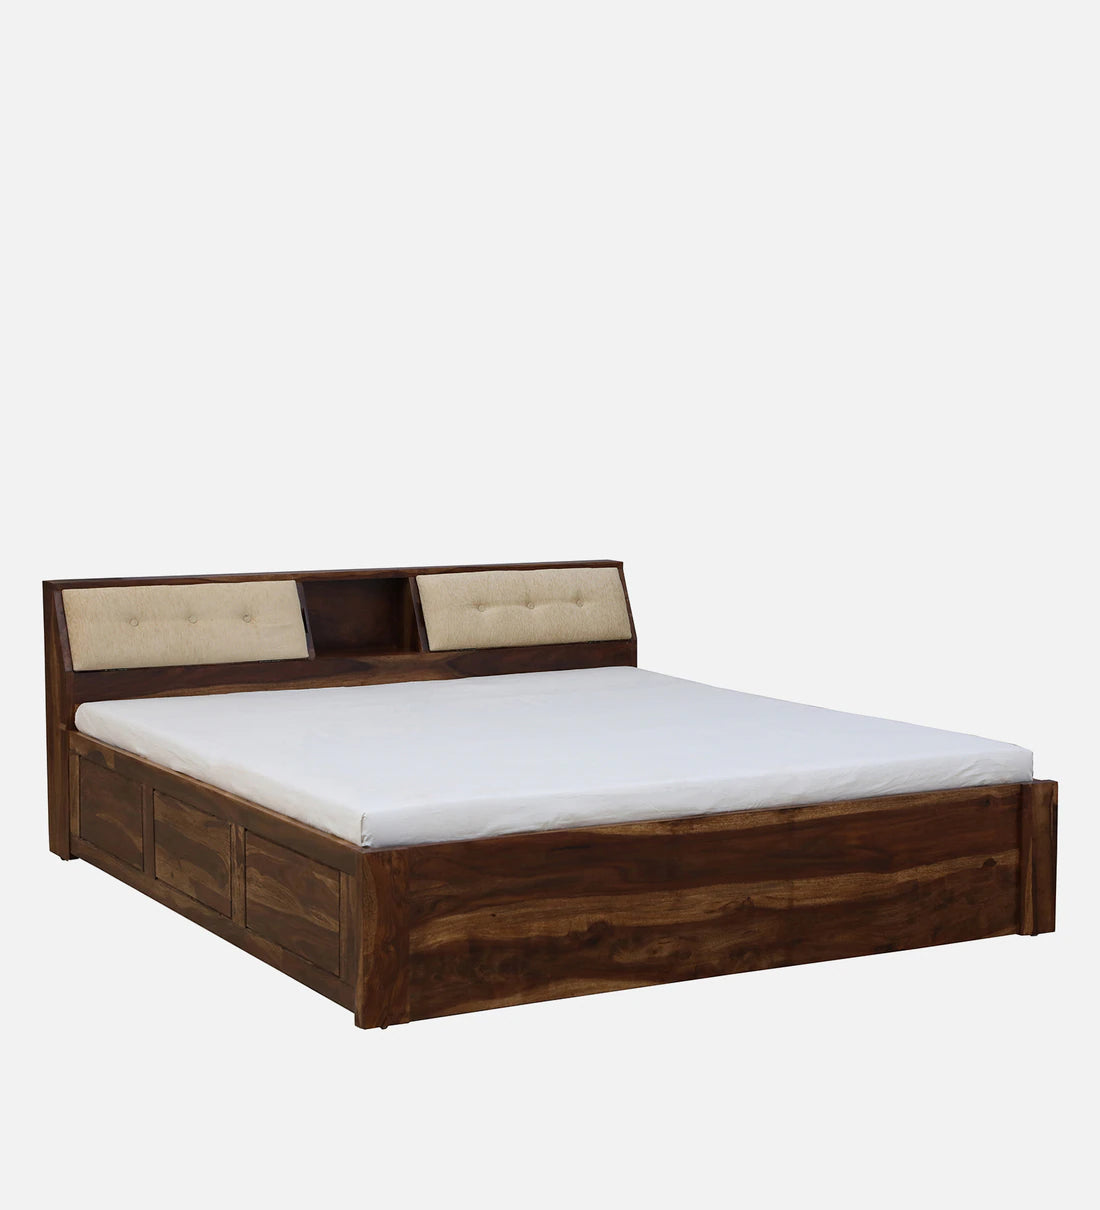 Sheesham Wood King Size Bed In Scratch Resistant Rustic Teak Finish With Box Storage